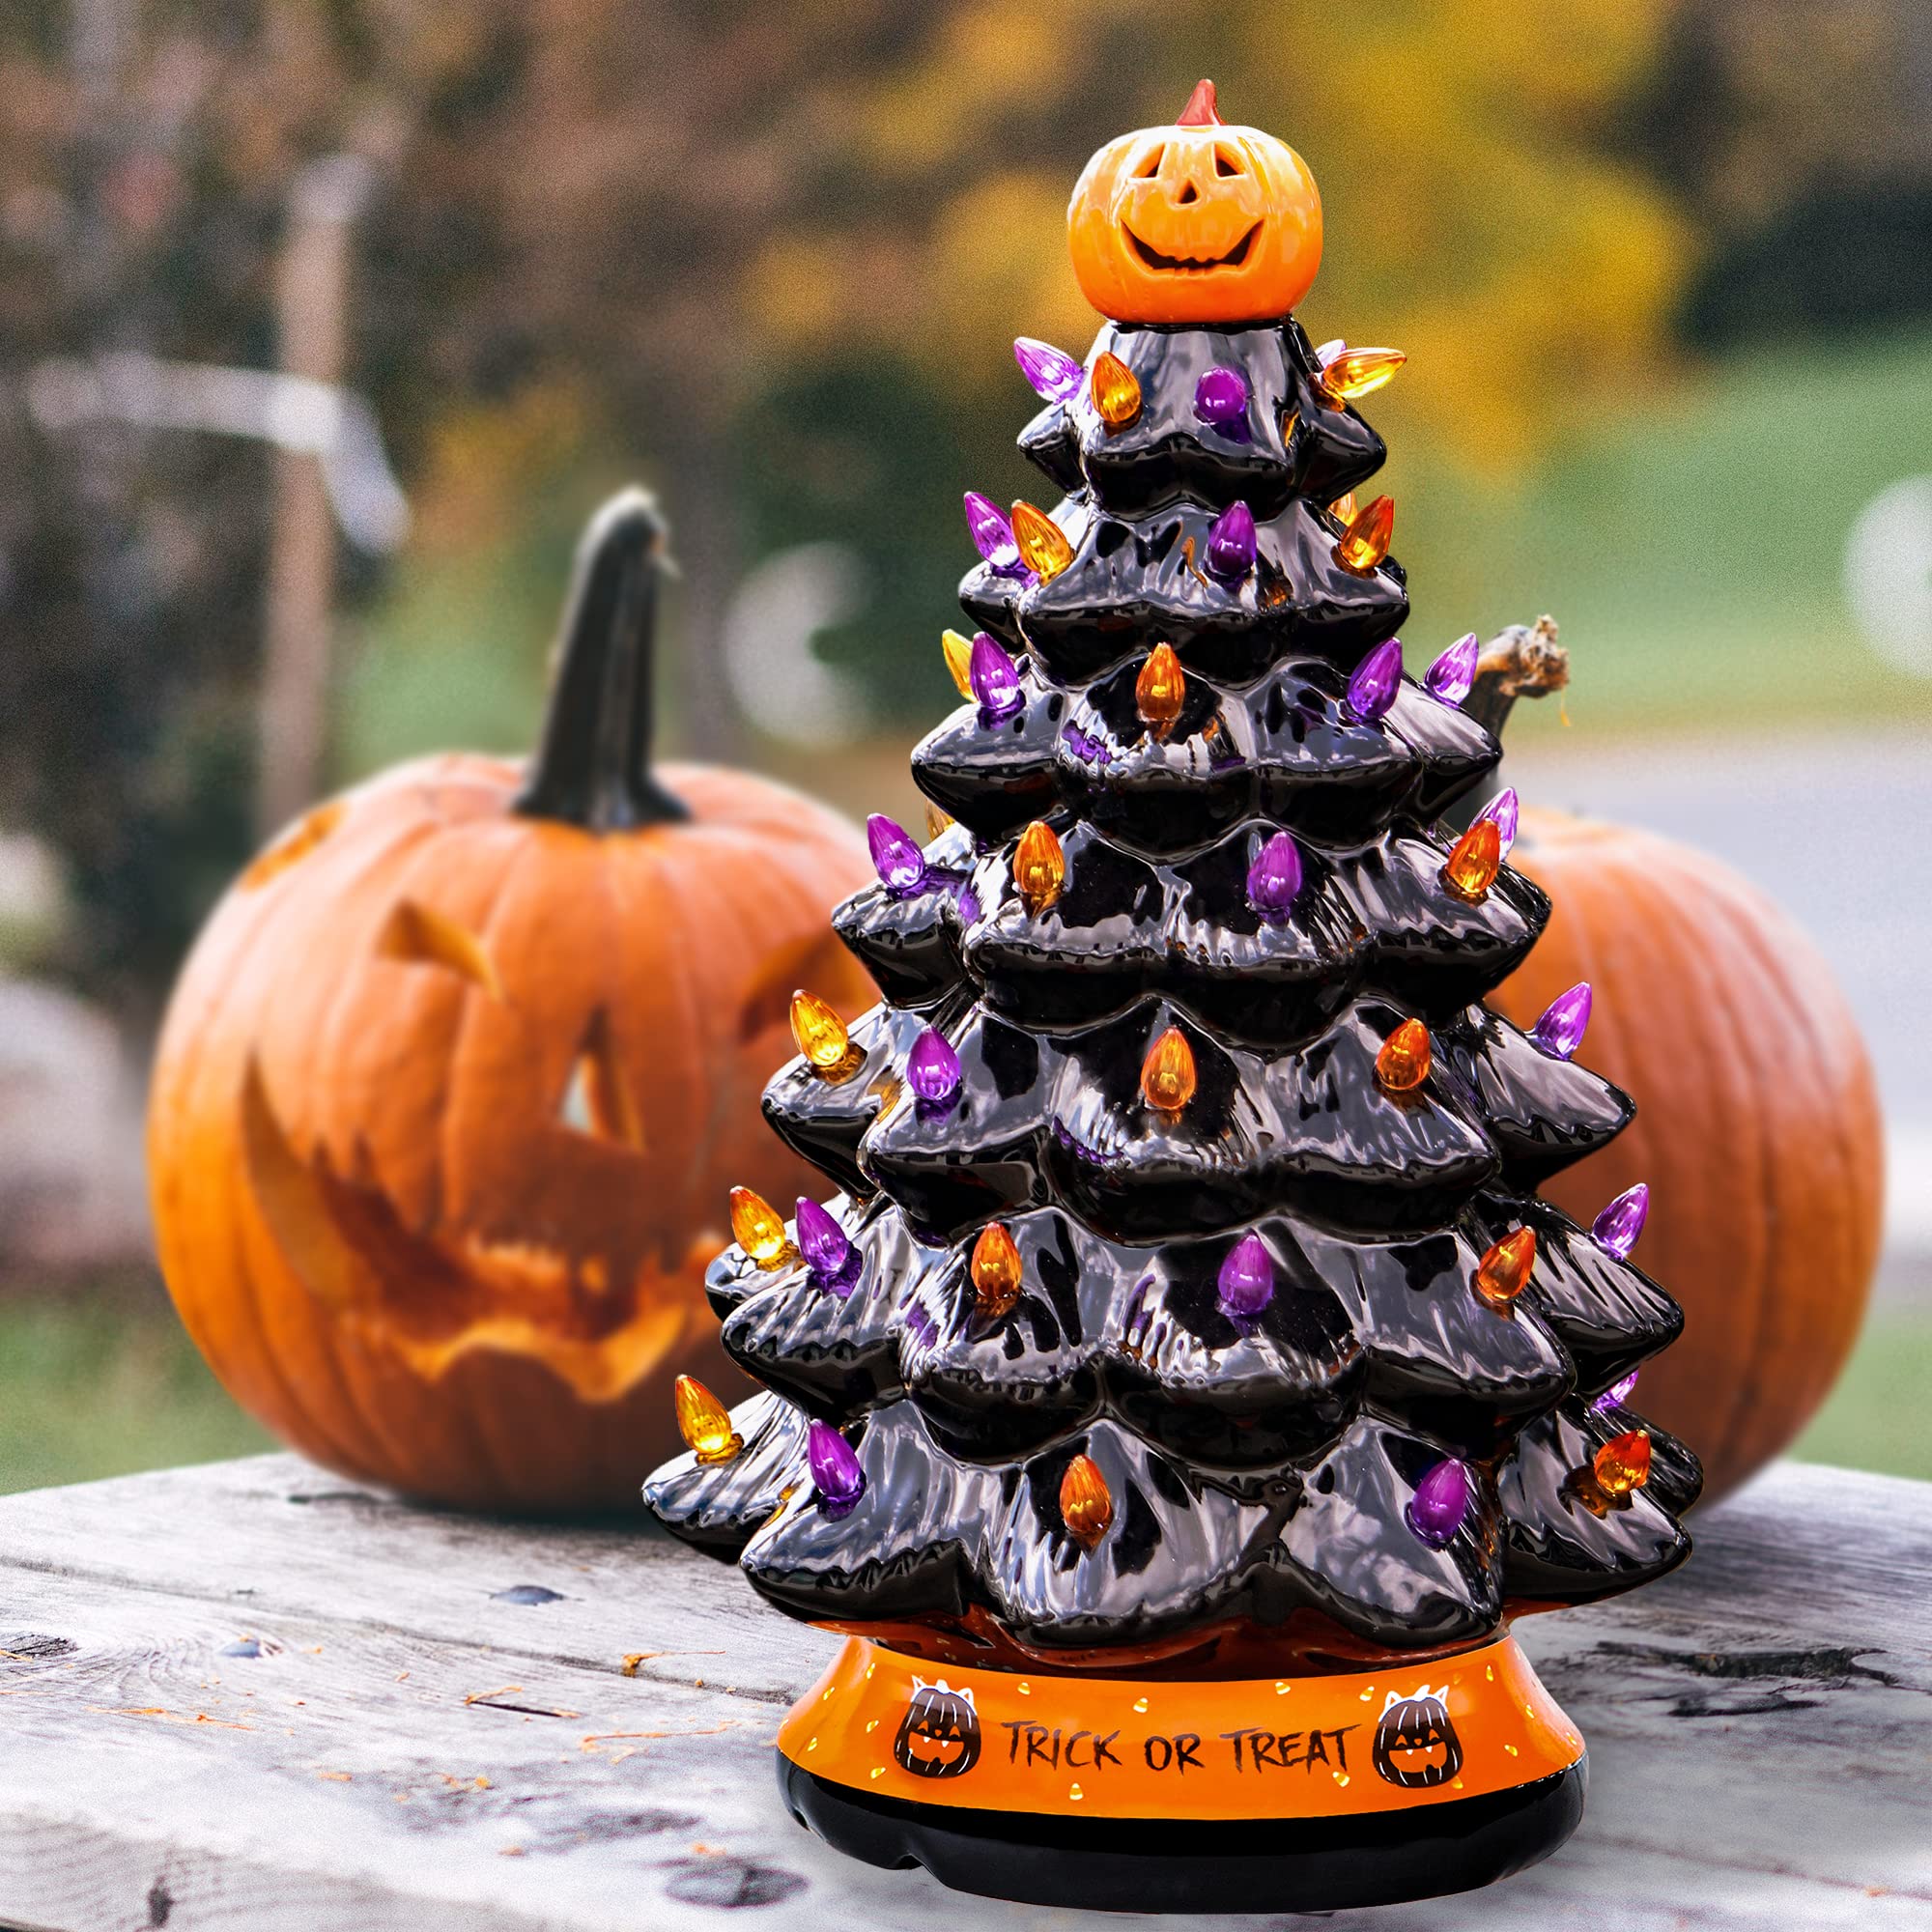 

Cj Christmas Tree - Halloween Decoration Made With Ceramic, -home Decoration-trick Or Treat- Over 35 Multicolor Bulbs, Led Light Up By Battery - Black, 9 Inch